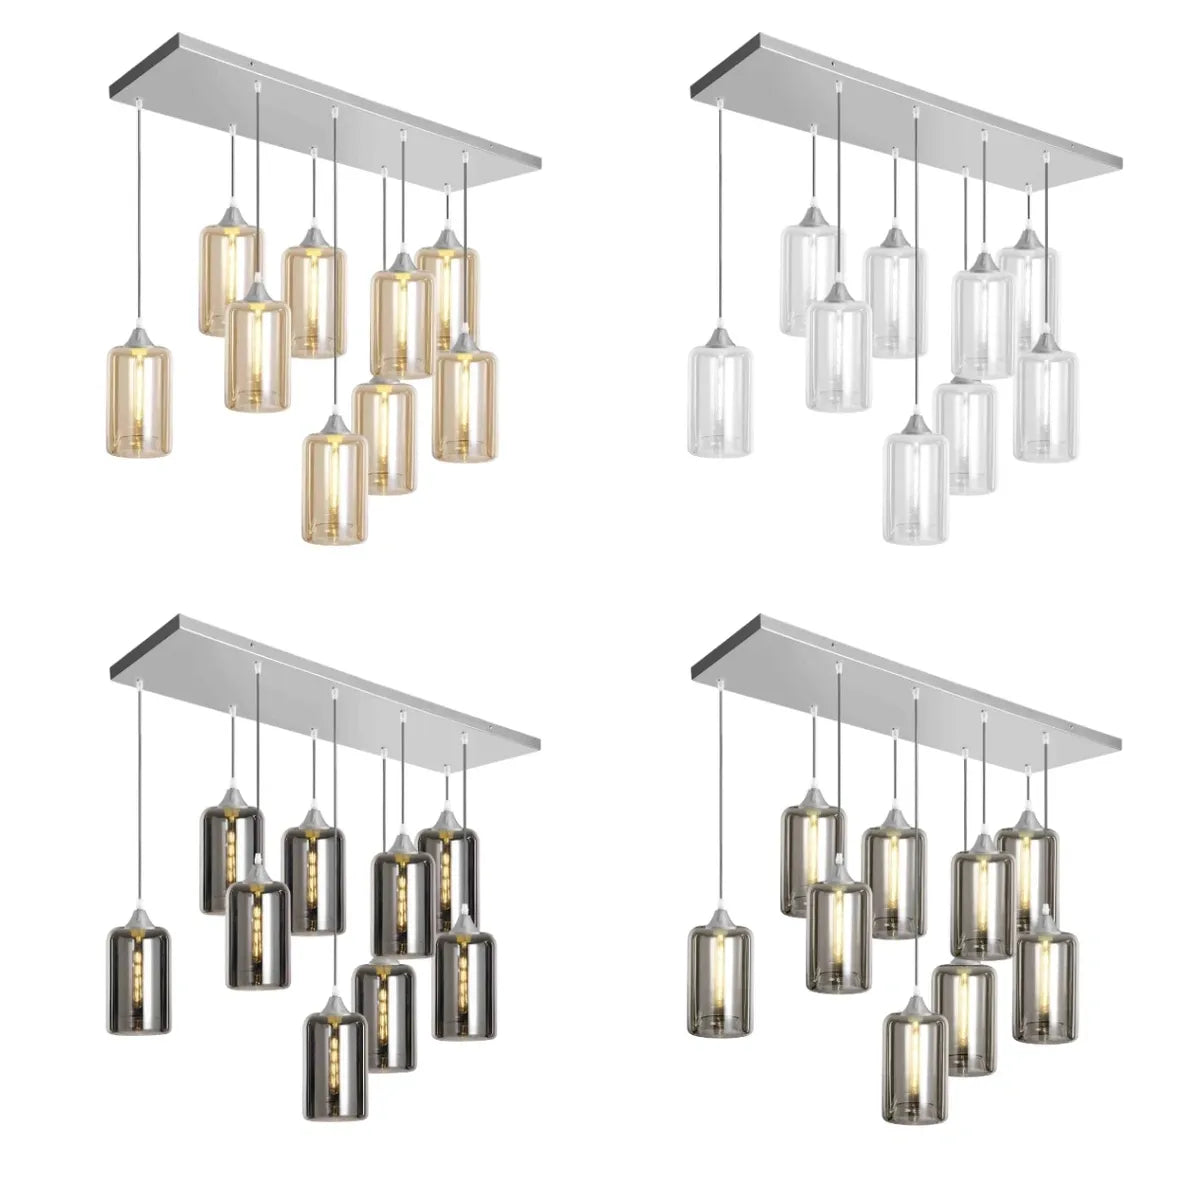 Murano 9 Light Silver Pendant with Cylinder Shades